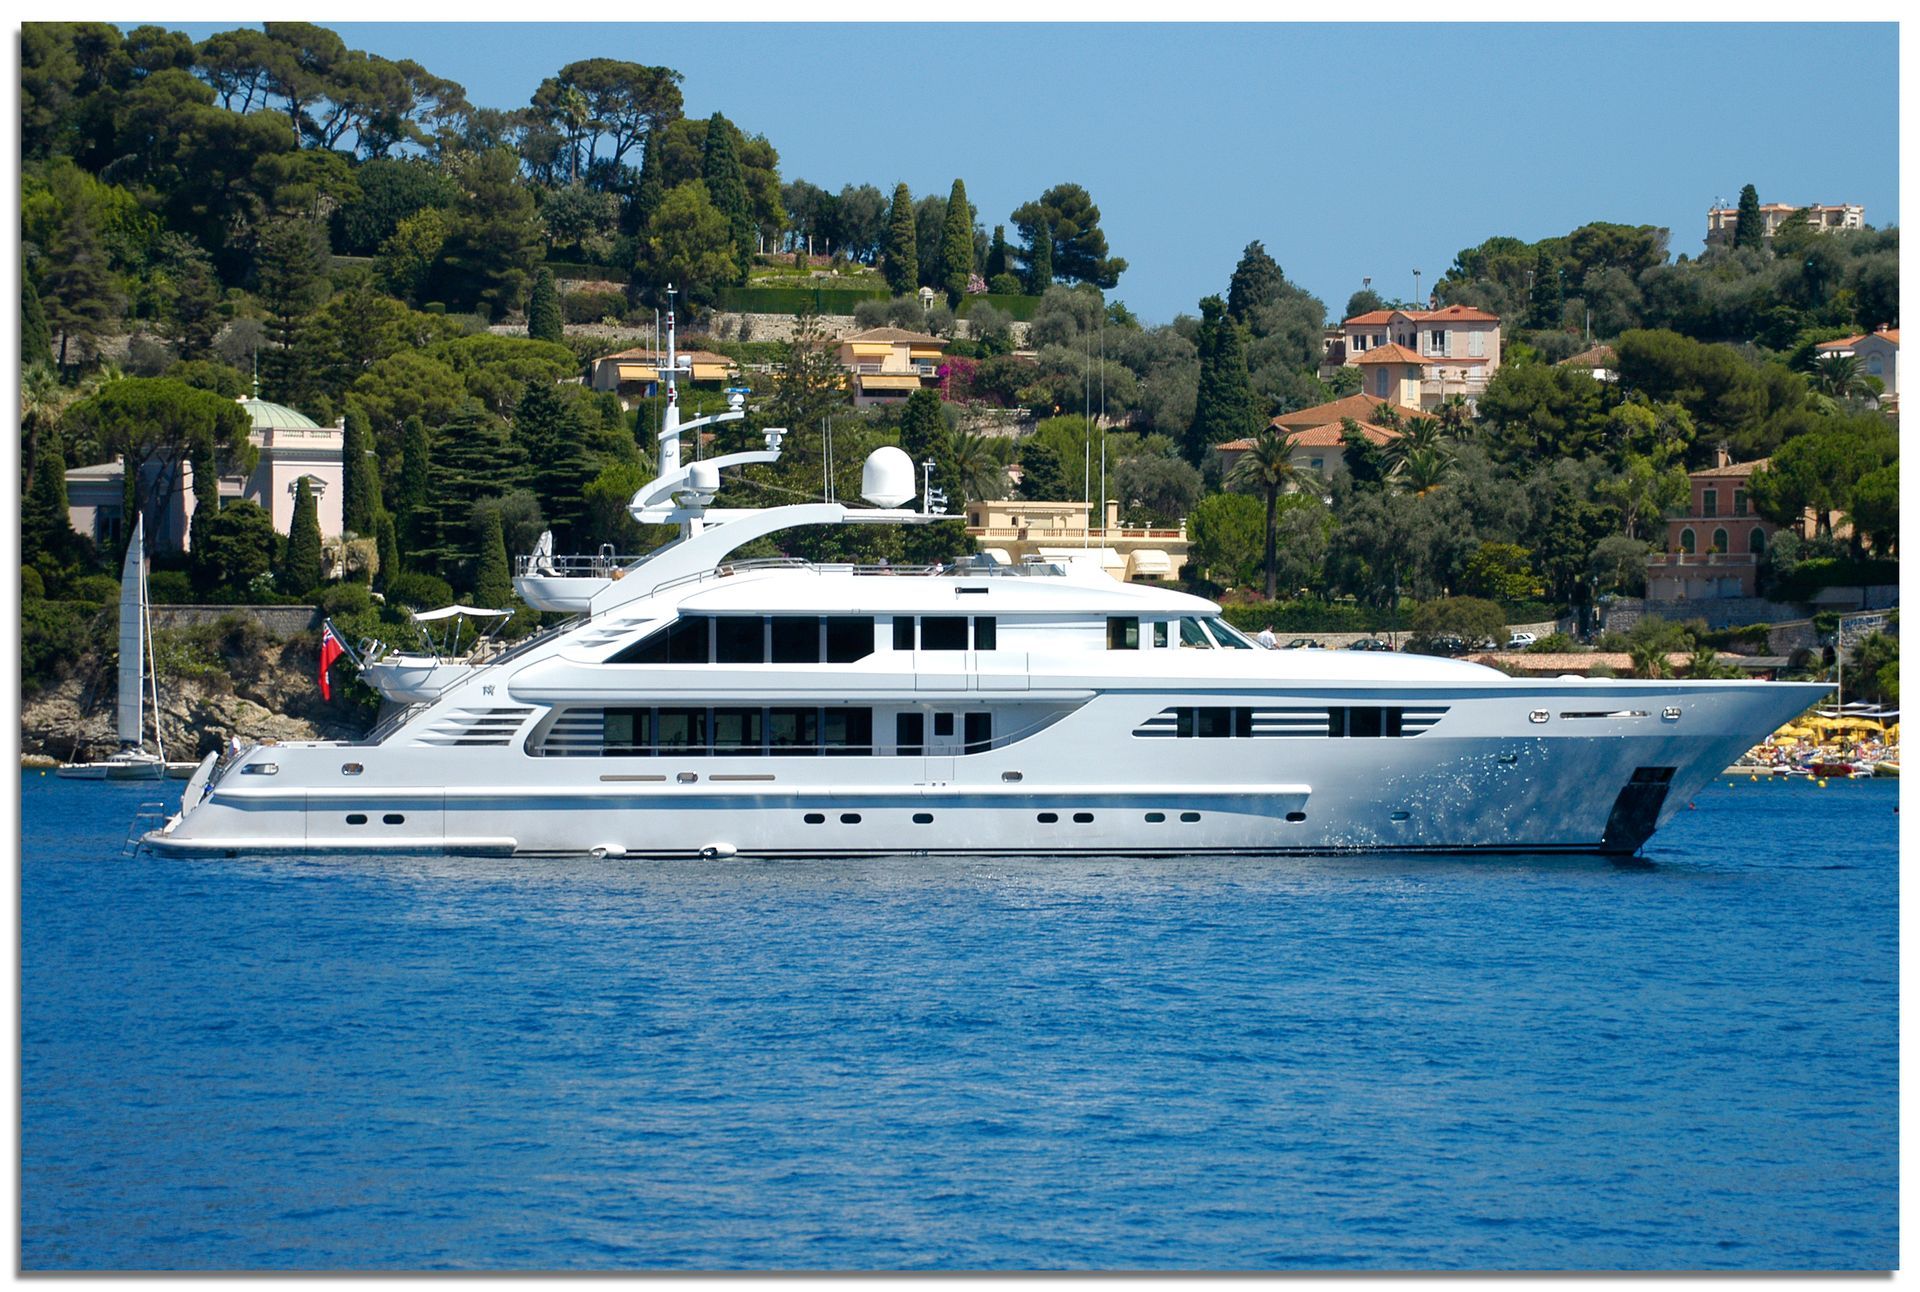 Superyacht moored in Villefranche, France